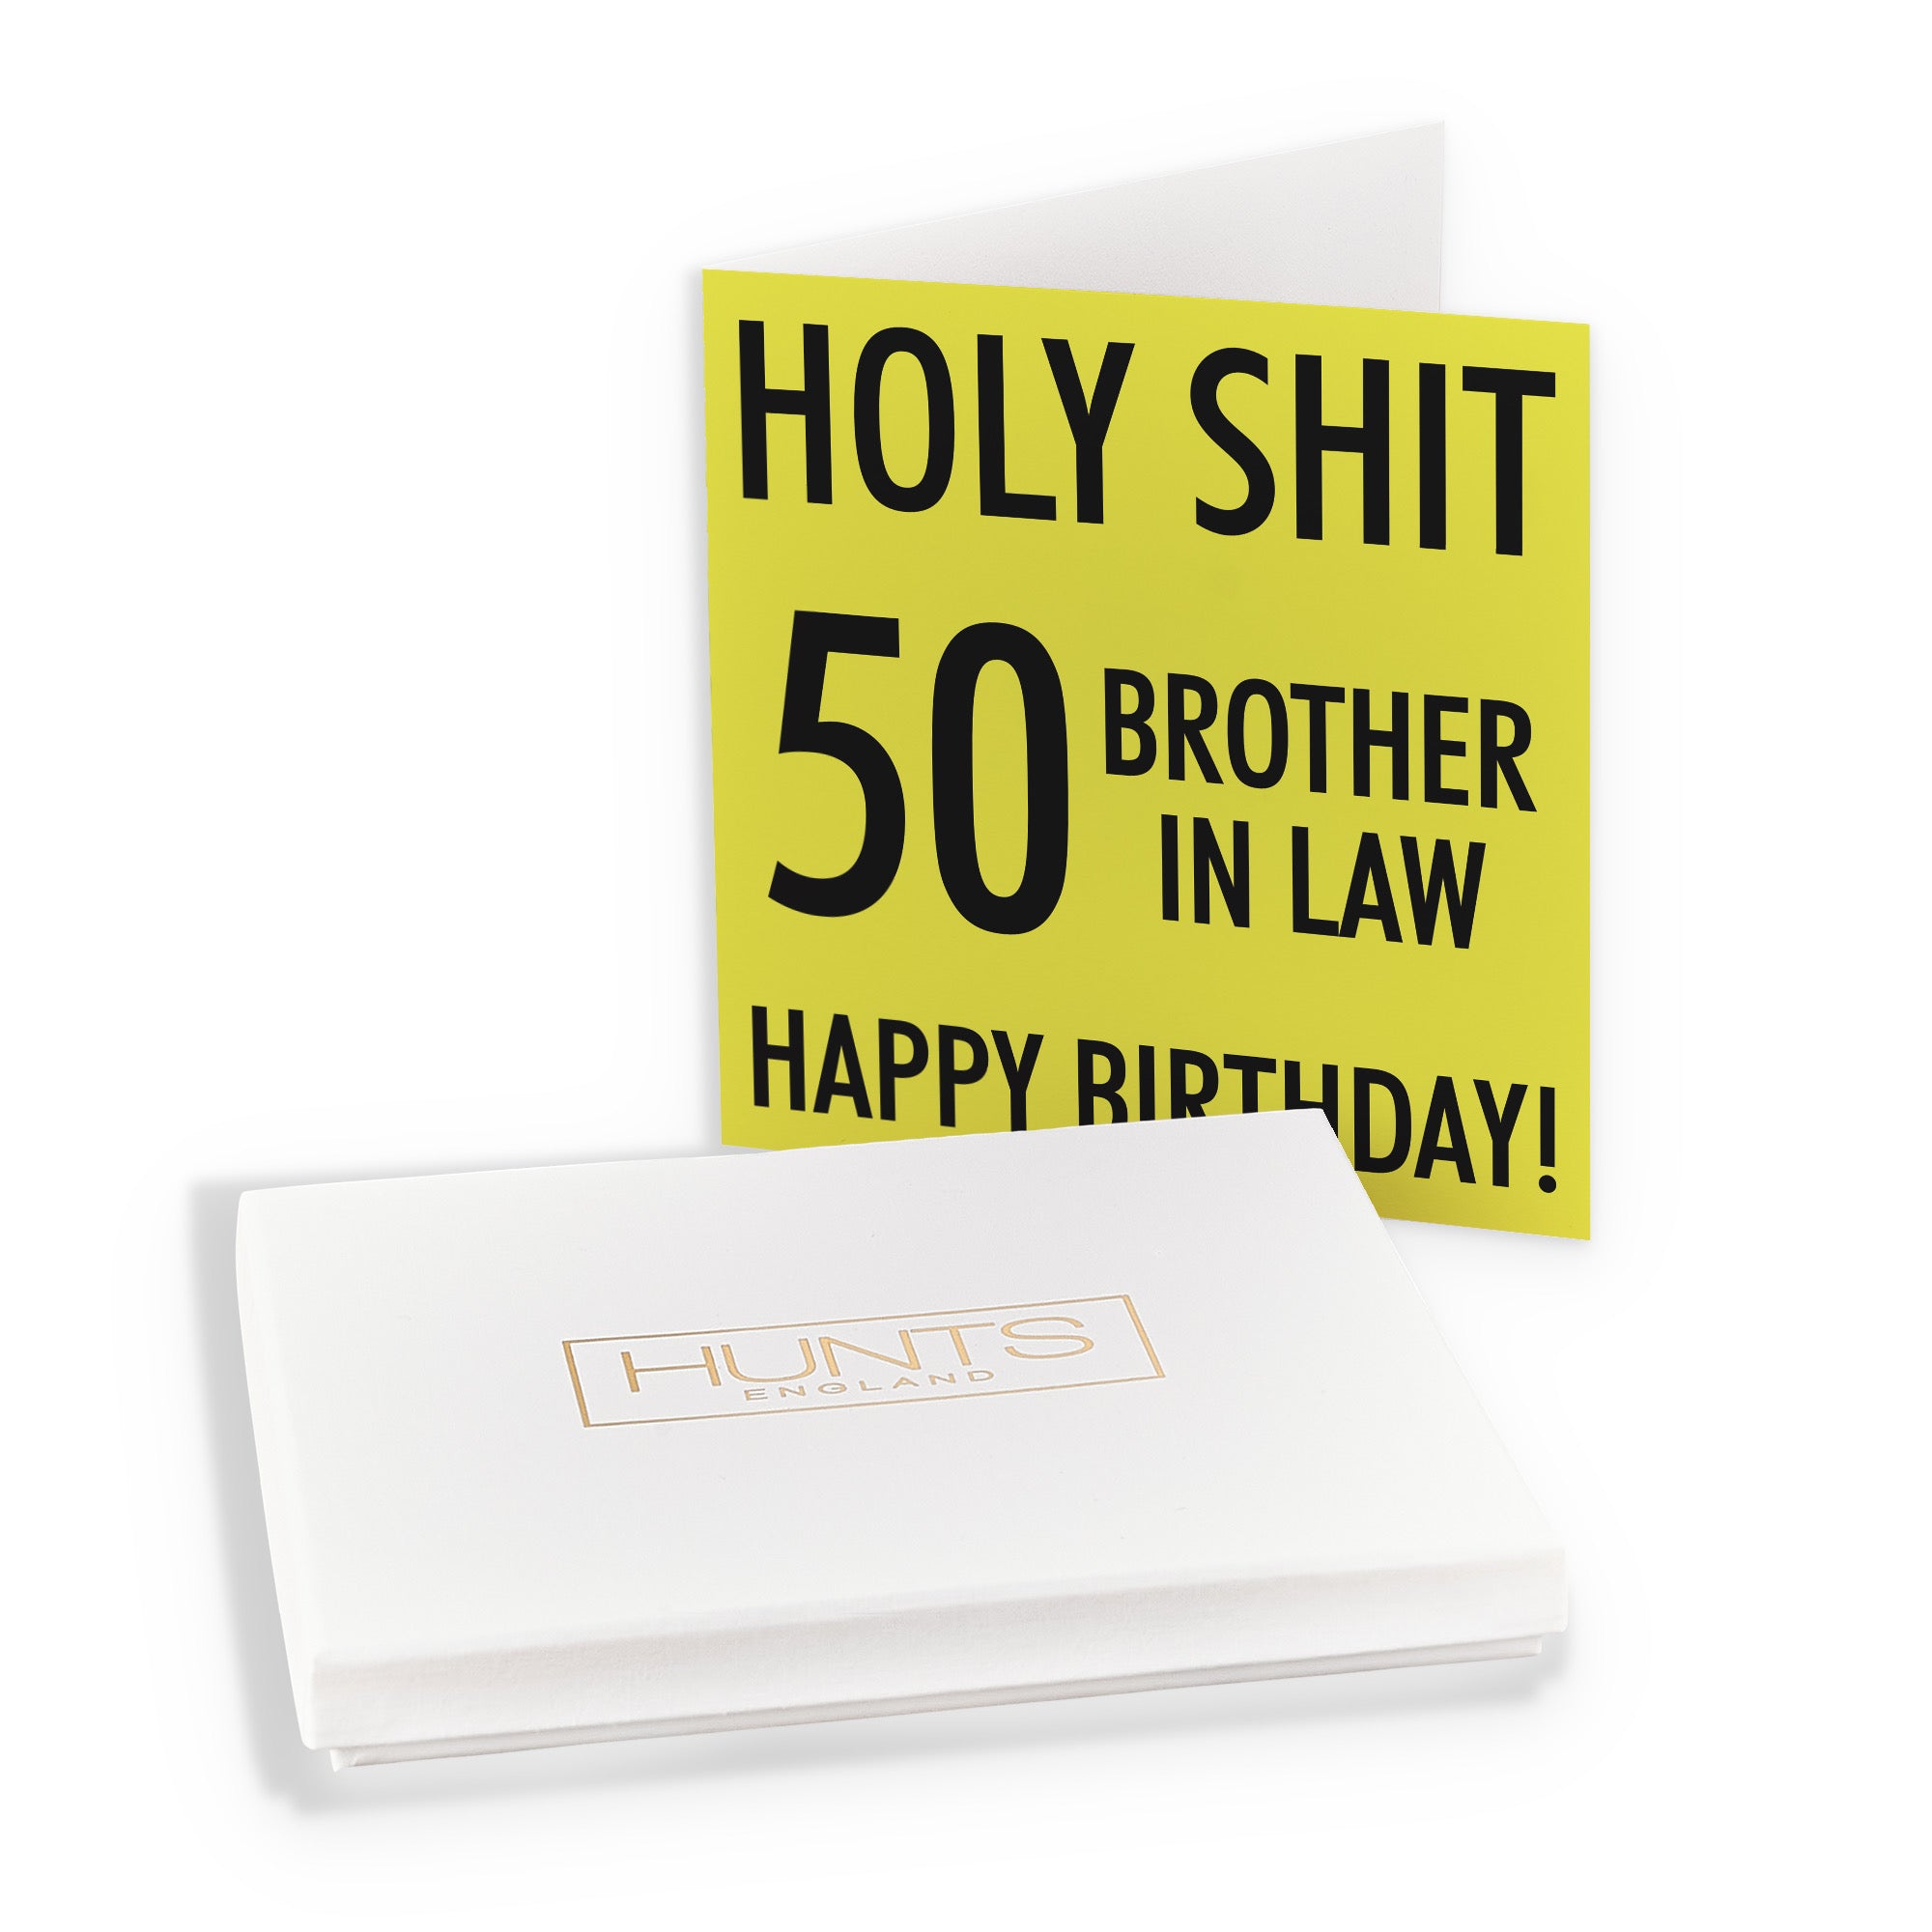 Boxed 50th Brother In Law Birthday Card Holy Shit - Default Title (B0D5RP7NZV)